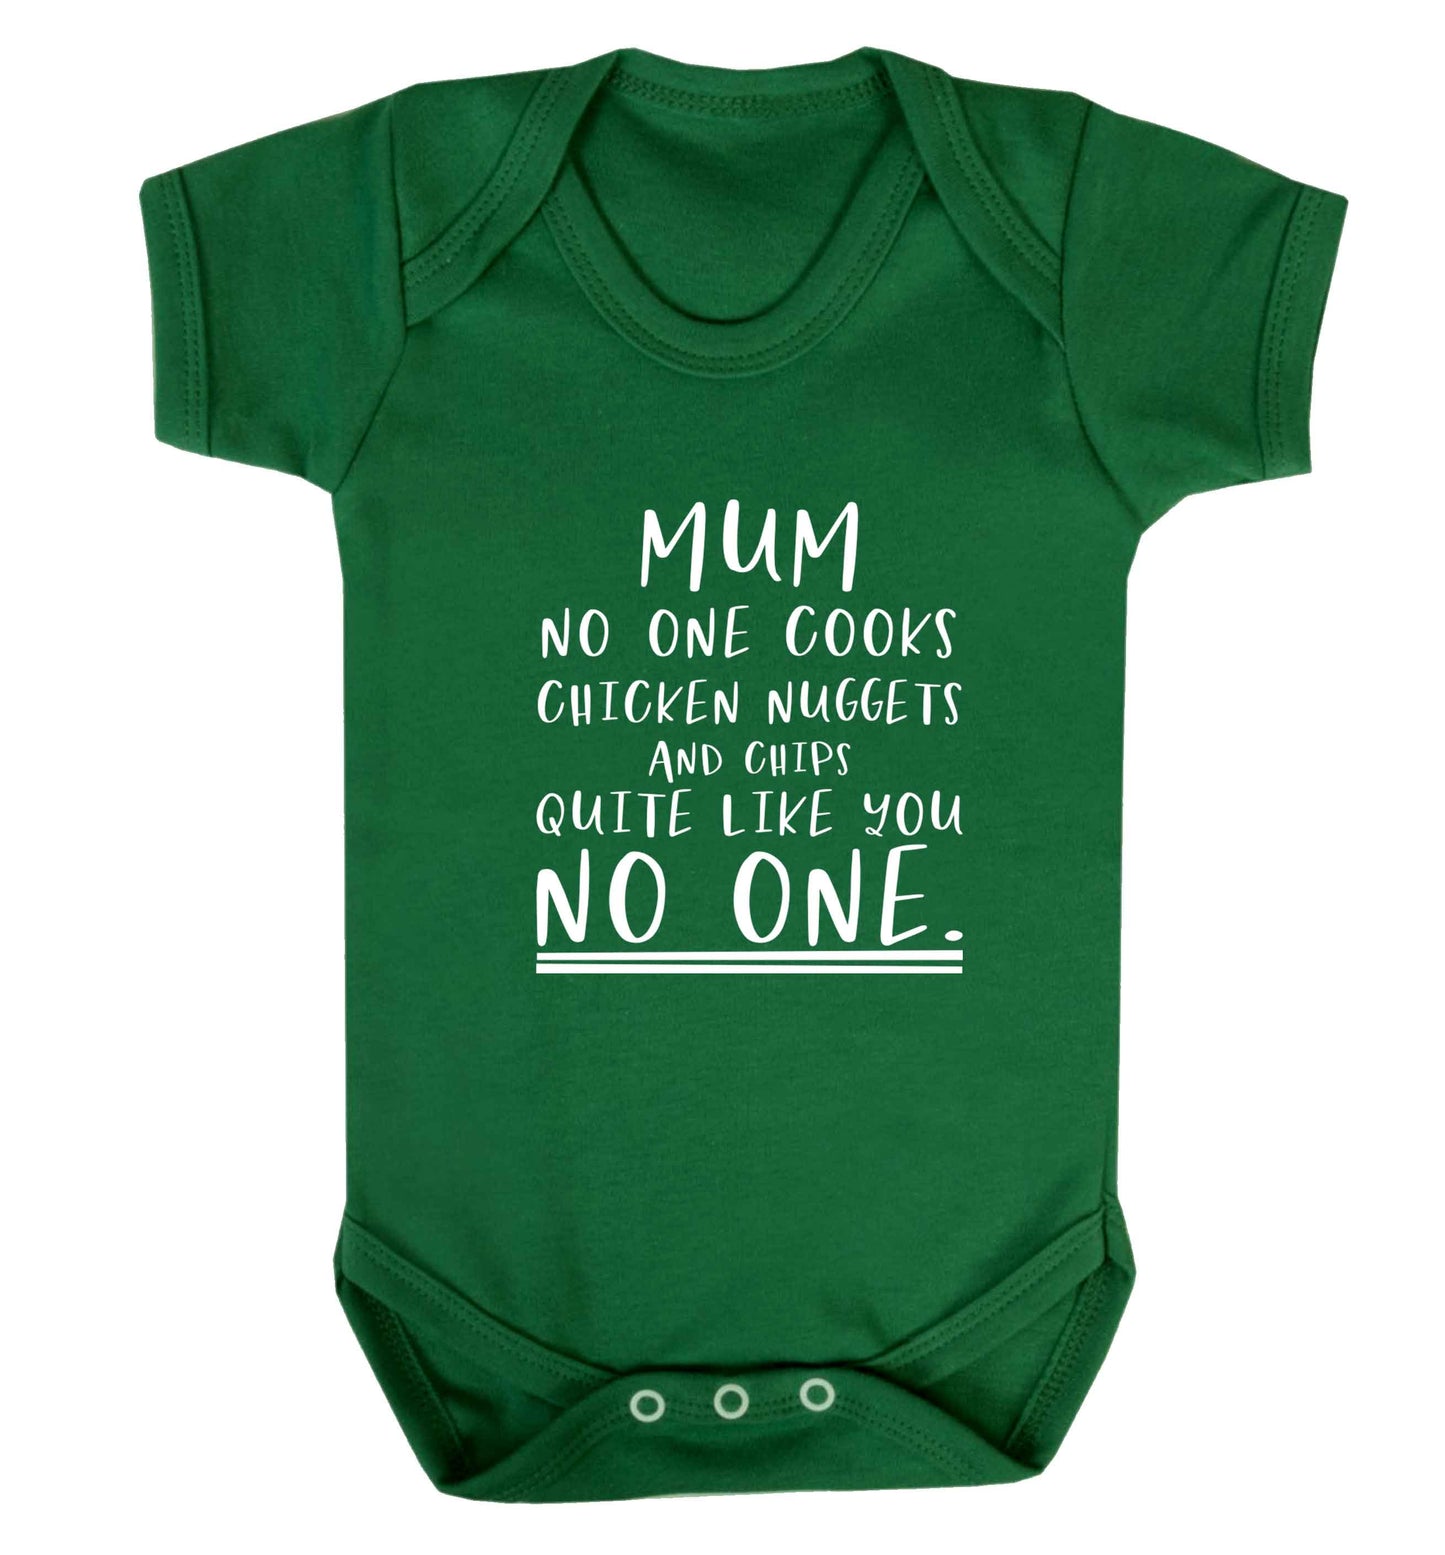 Super funny sassy gift for mother's day or birthday!  Mum no one cooks chicken nuggets and chips like you no one baby vest green 18-24 months